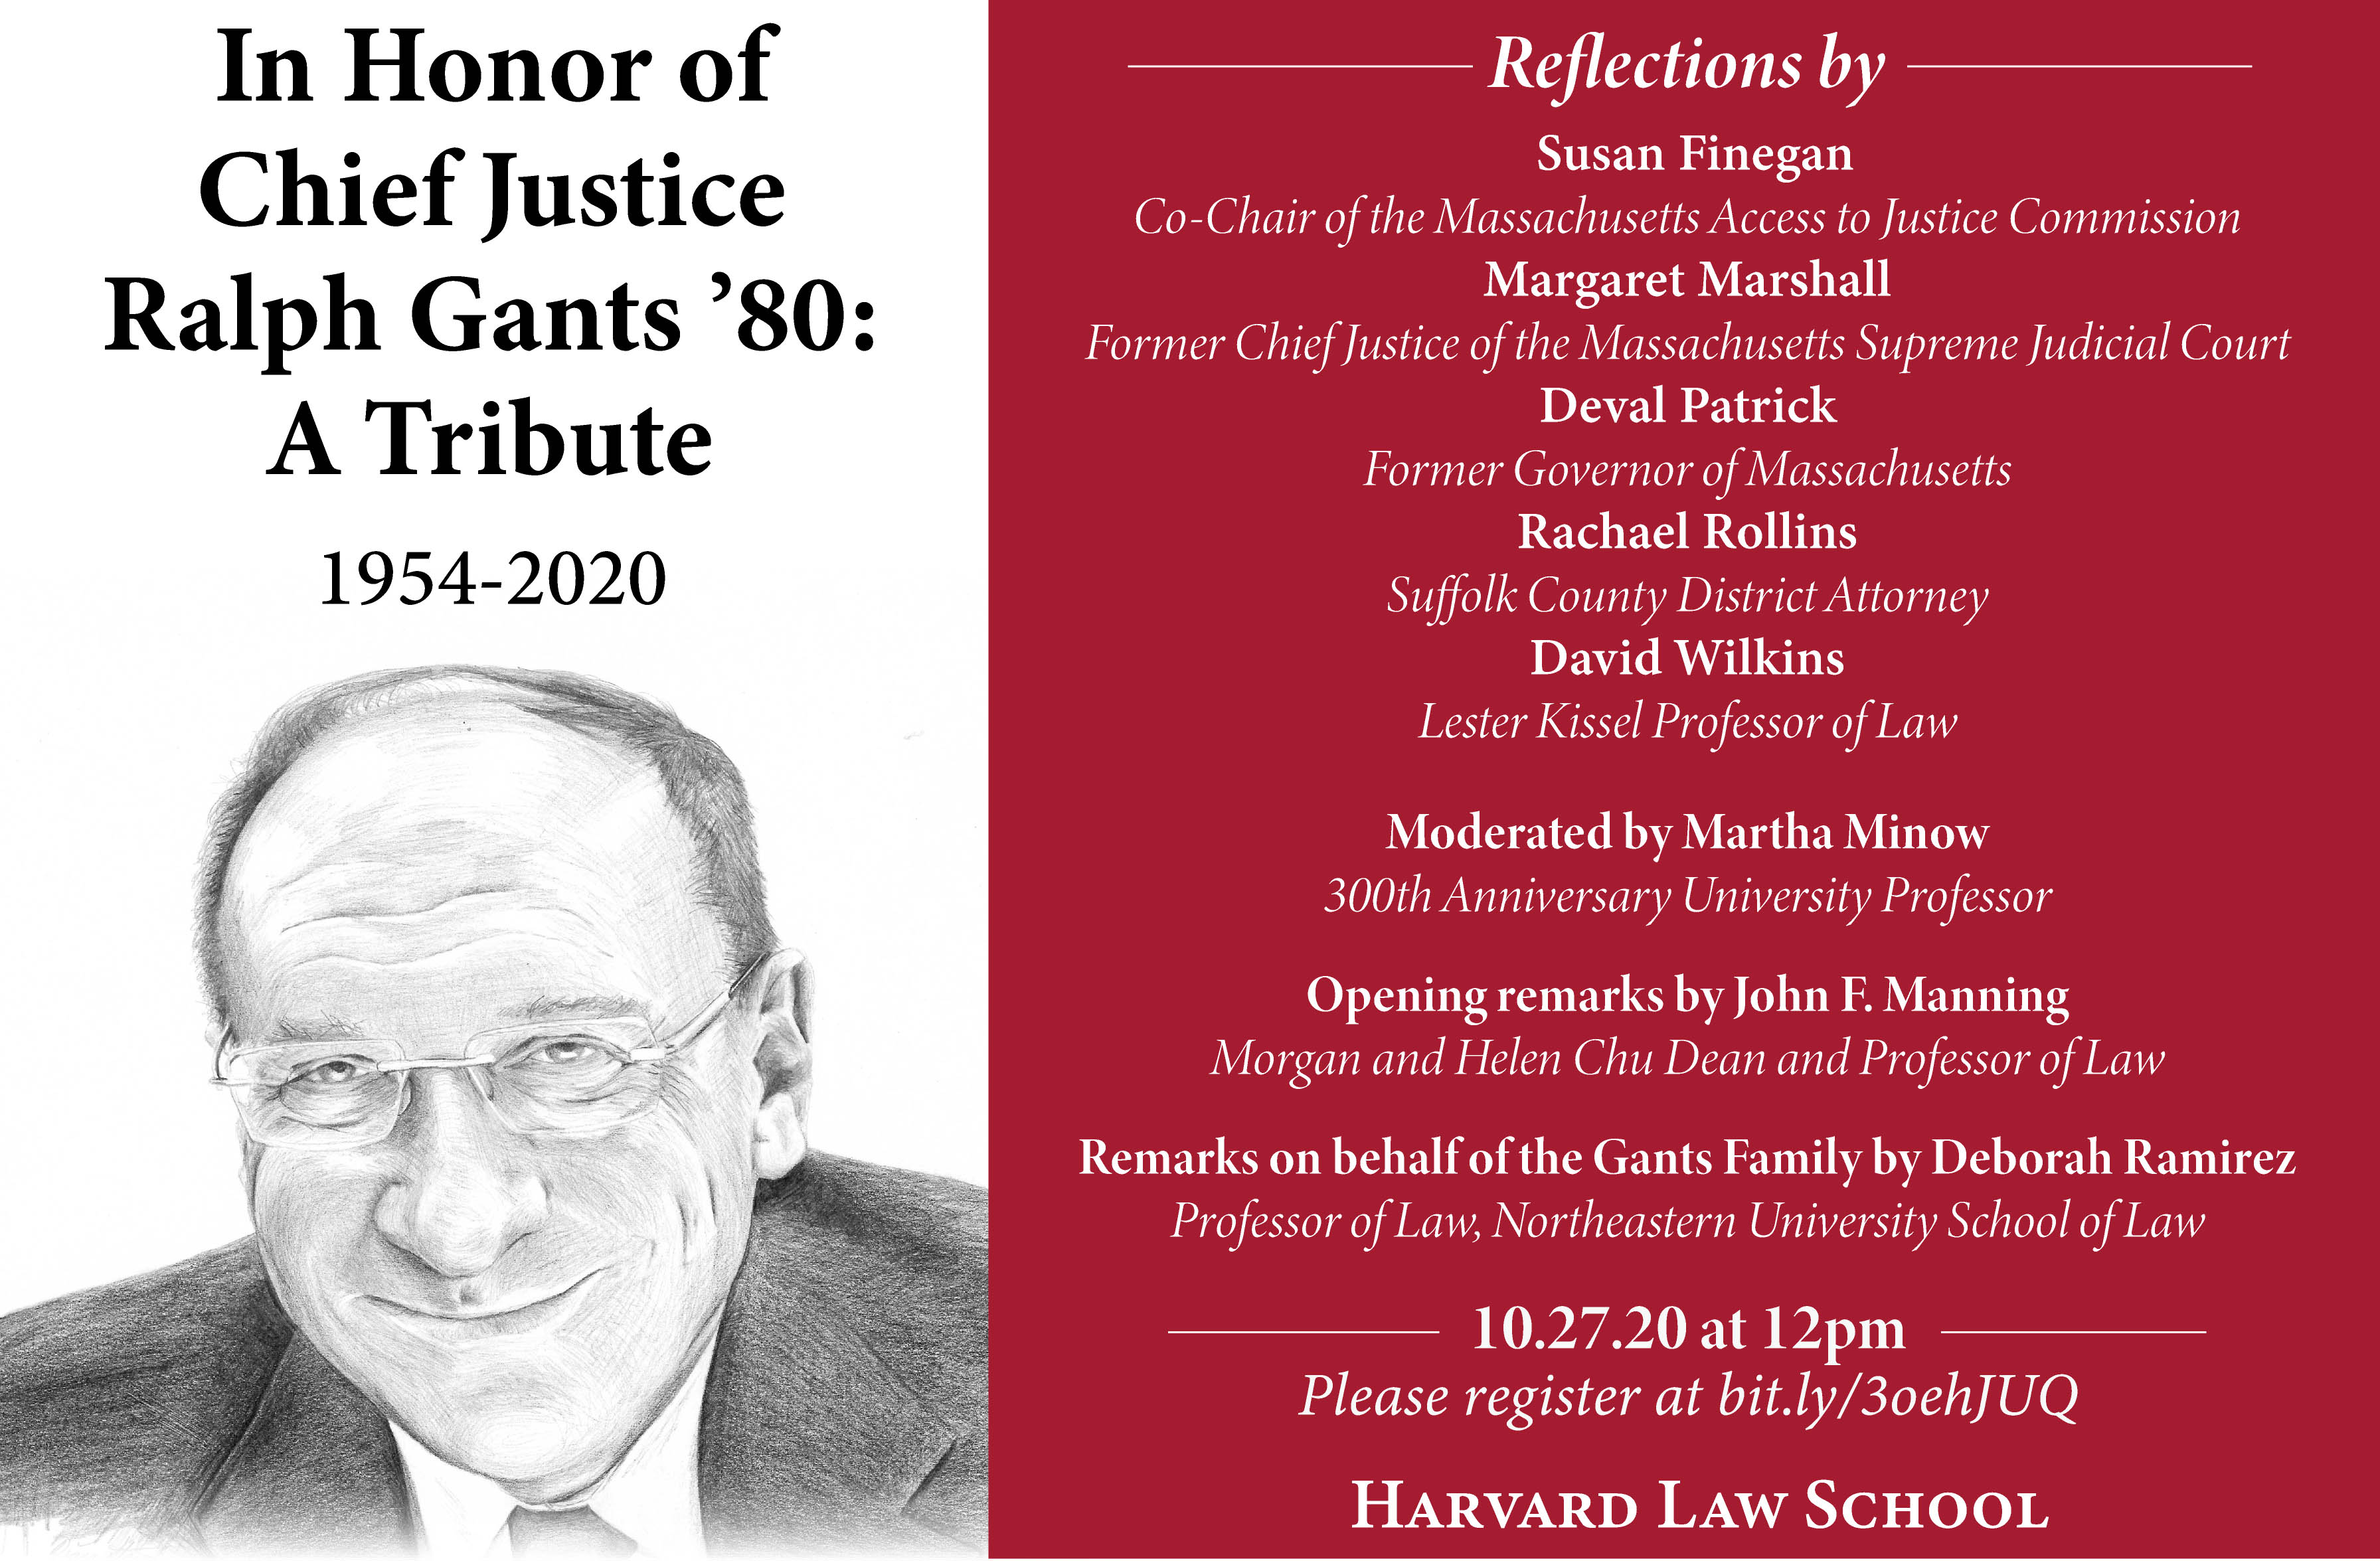 In Honor of Chief Justice Ralph Gants '80: A Tribute